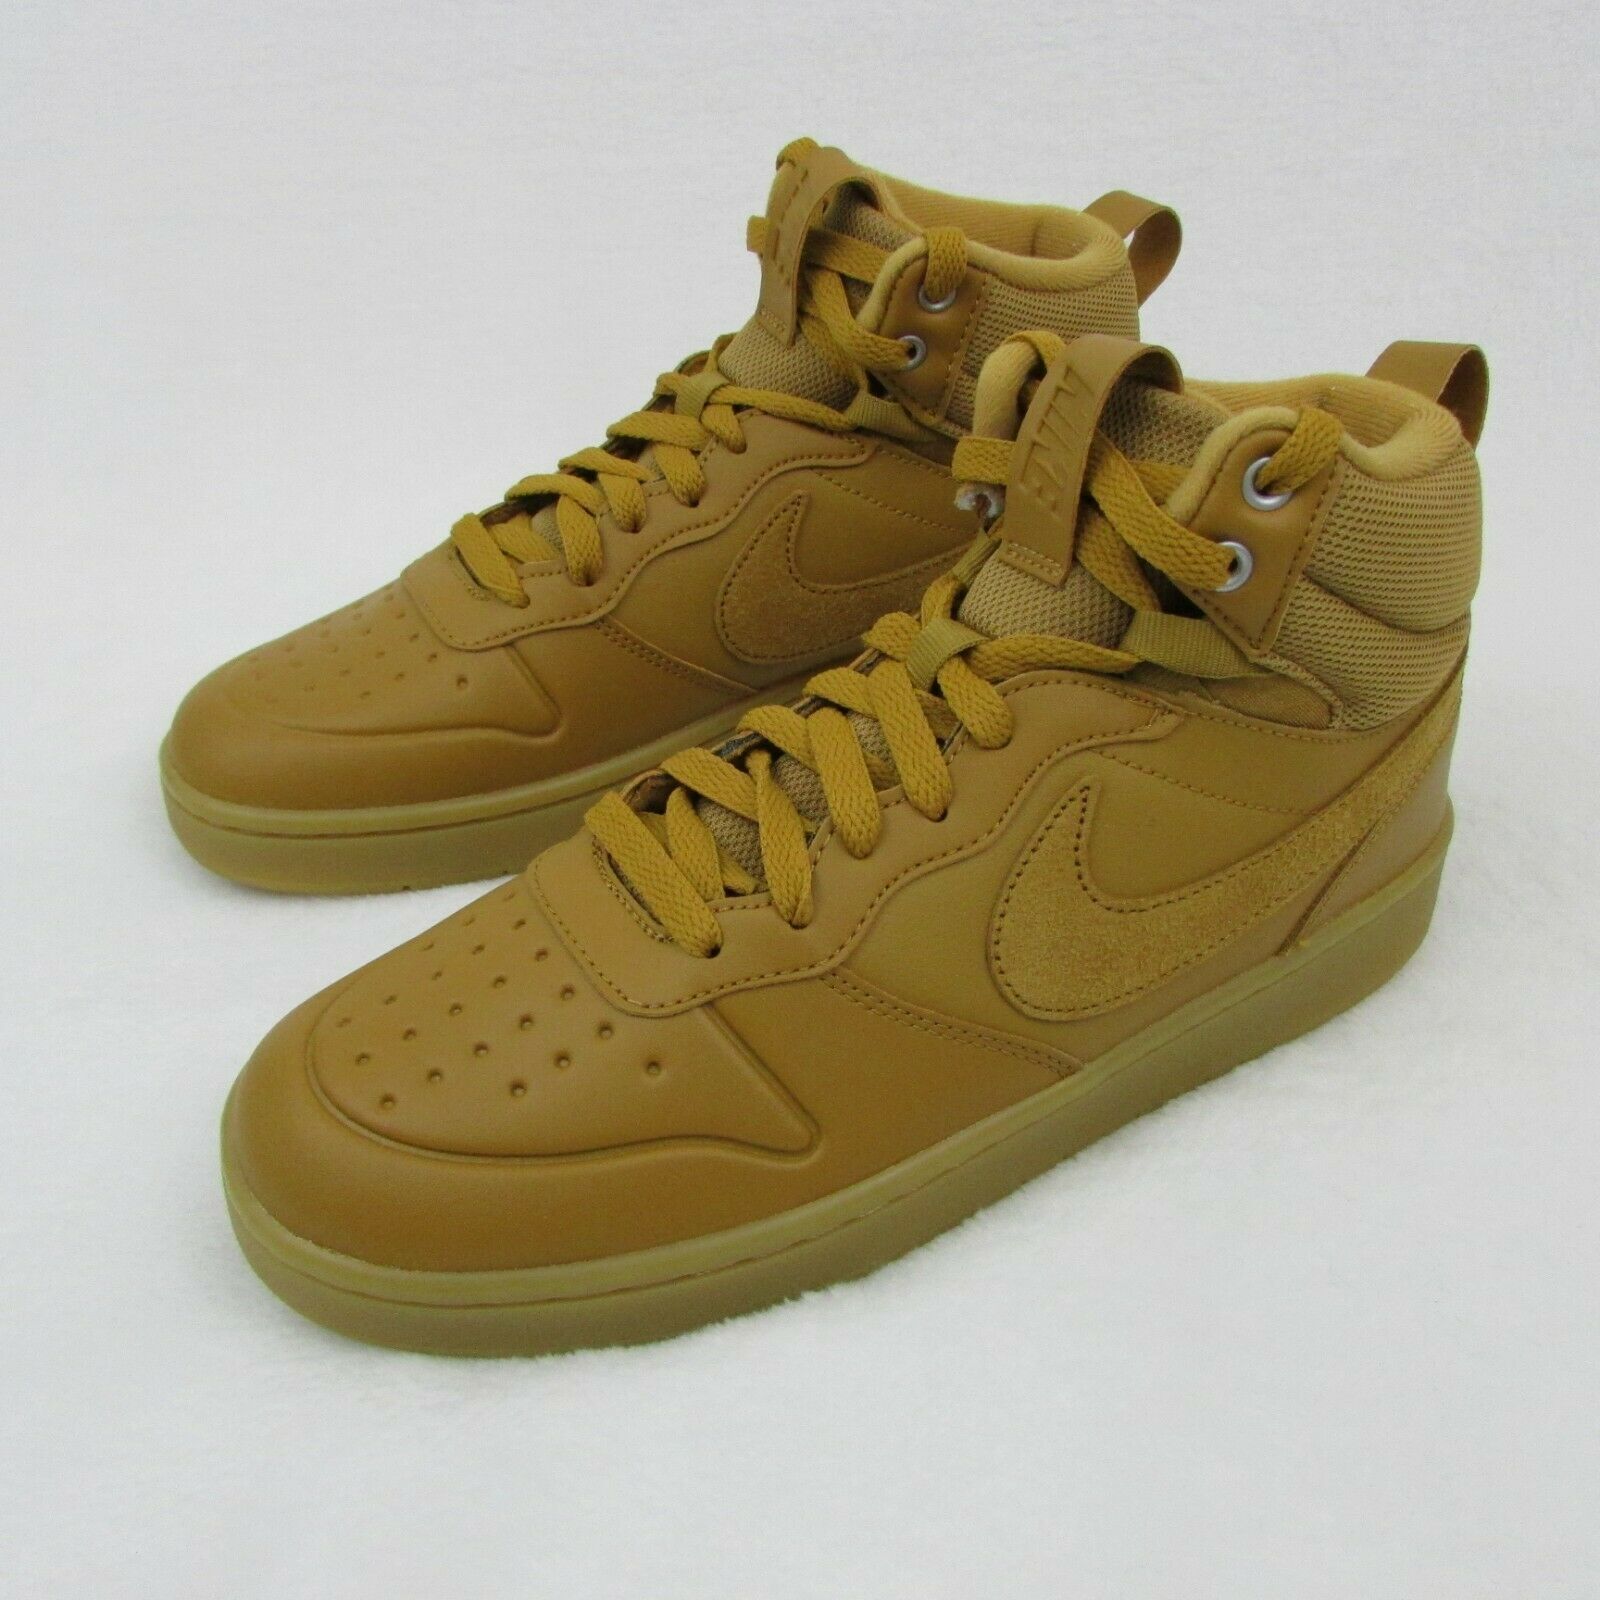 Nike Court Borough Mid Boot Shoes BQ5440-700 Wheat Brown Size 7 Youth Eur 40